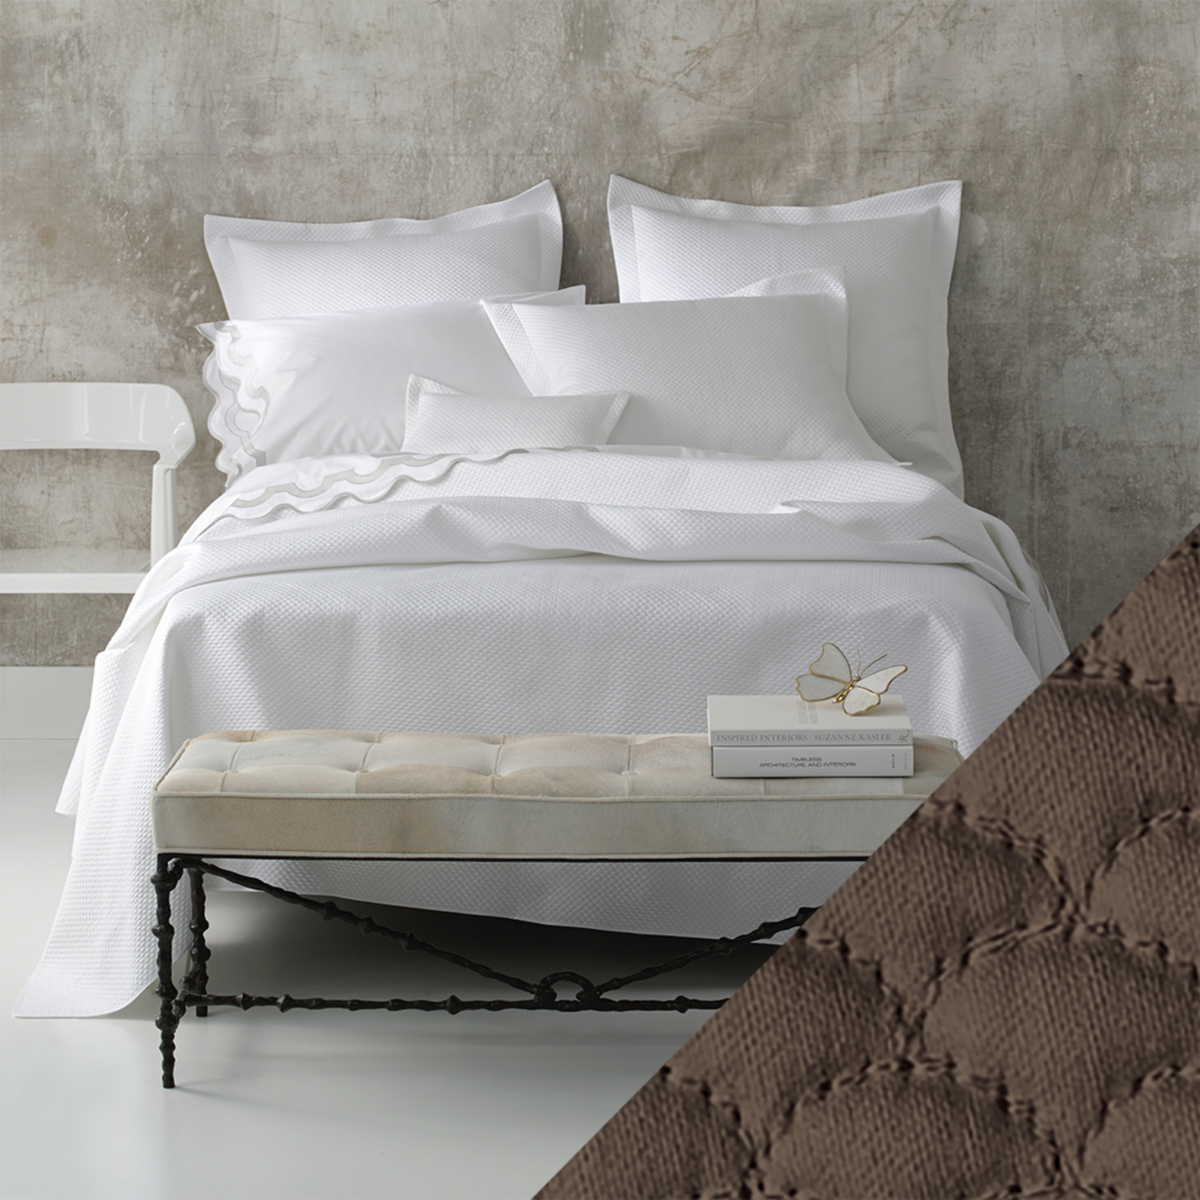 Full View of Matouk Alba Bedding with Sable Color Sample